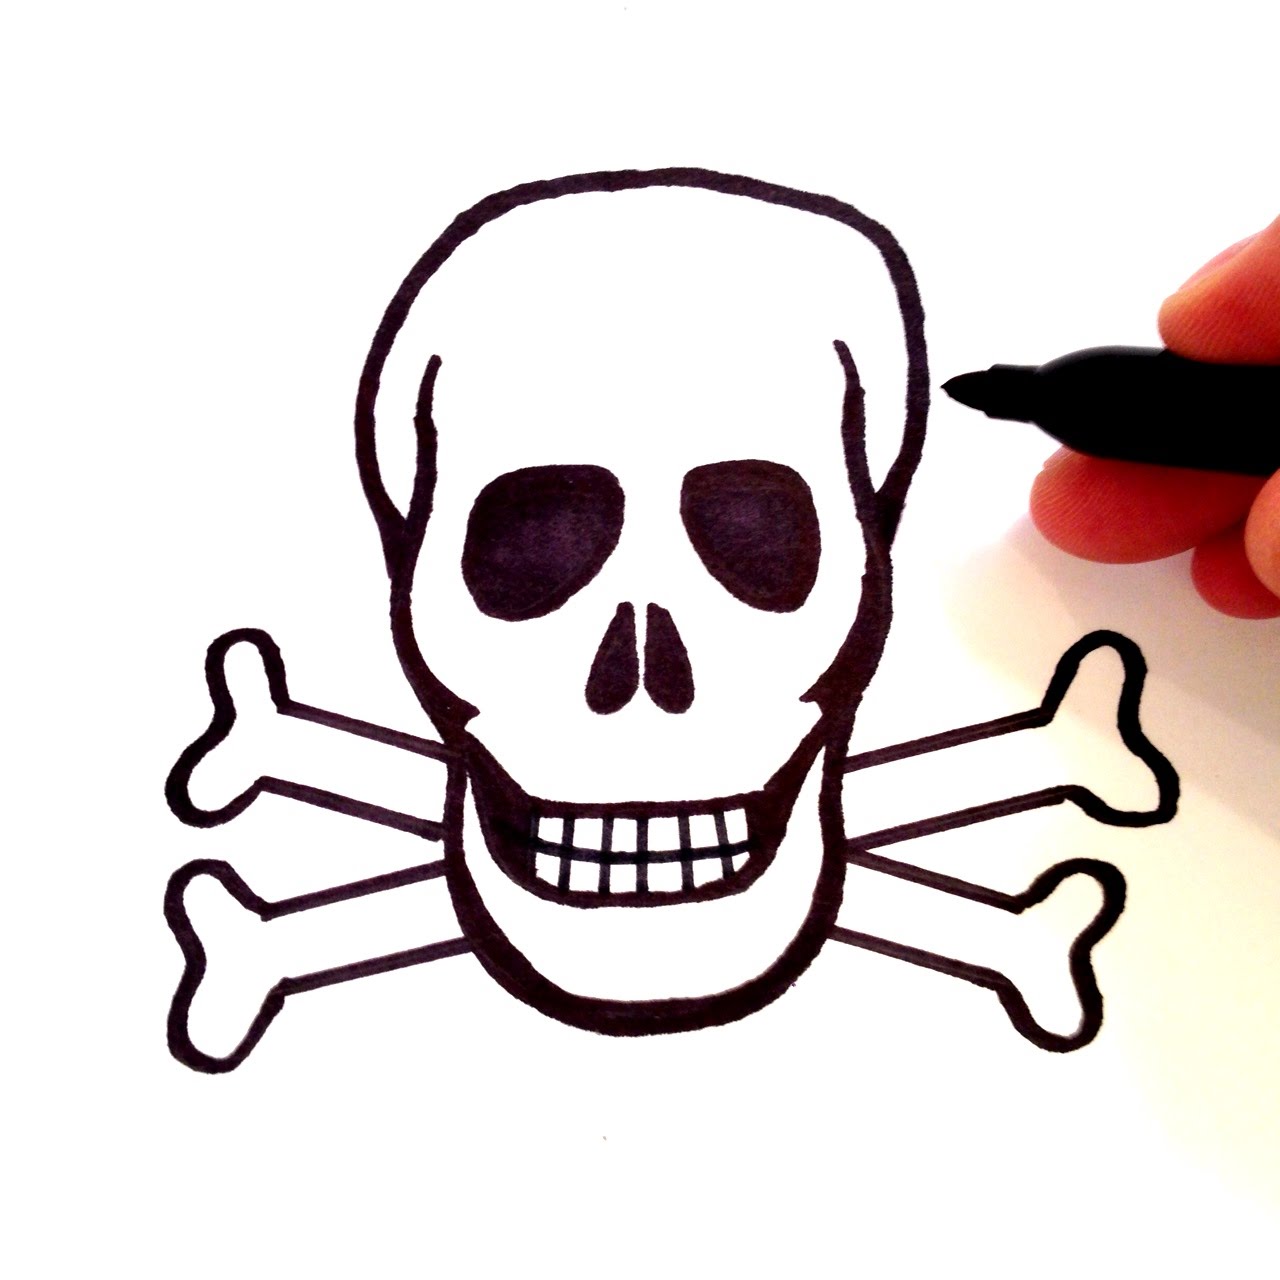 How to Draw a Skull with Crossbones - YouTube